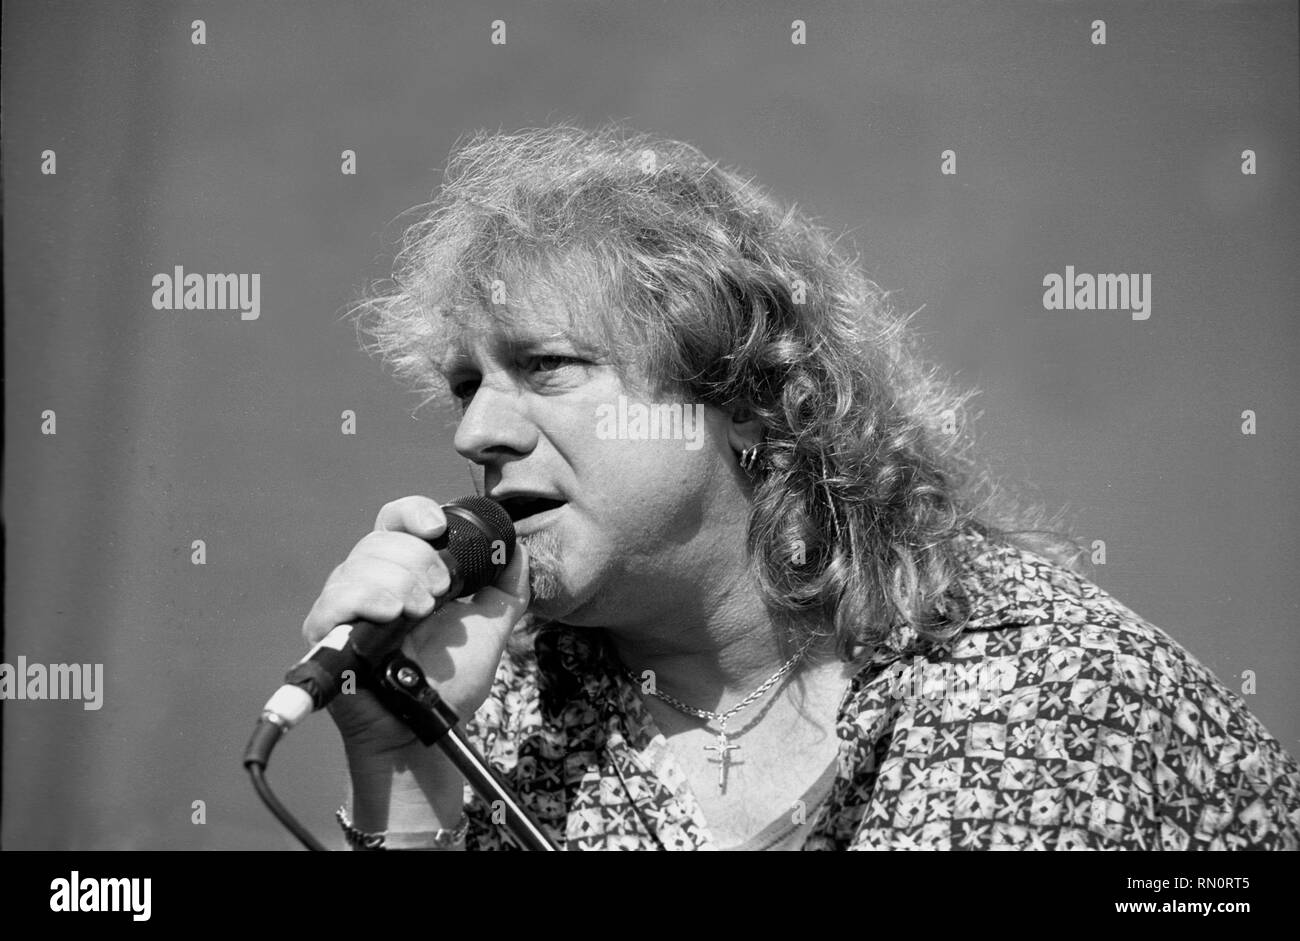 Vocalist Lou Gramm is shown performing on stage during a 'live' concert appearance with Foreigner. Stock Photo